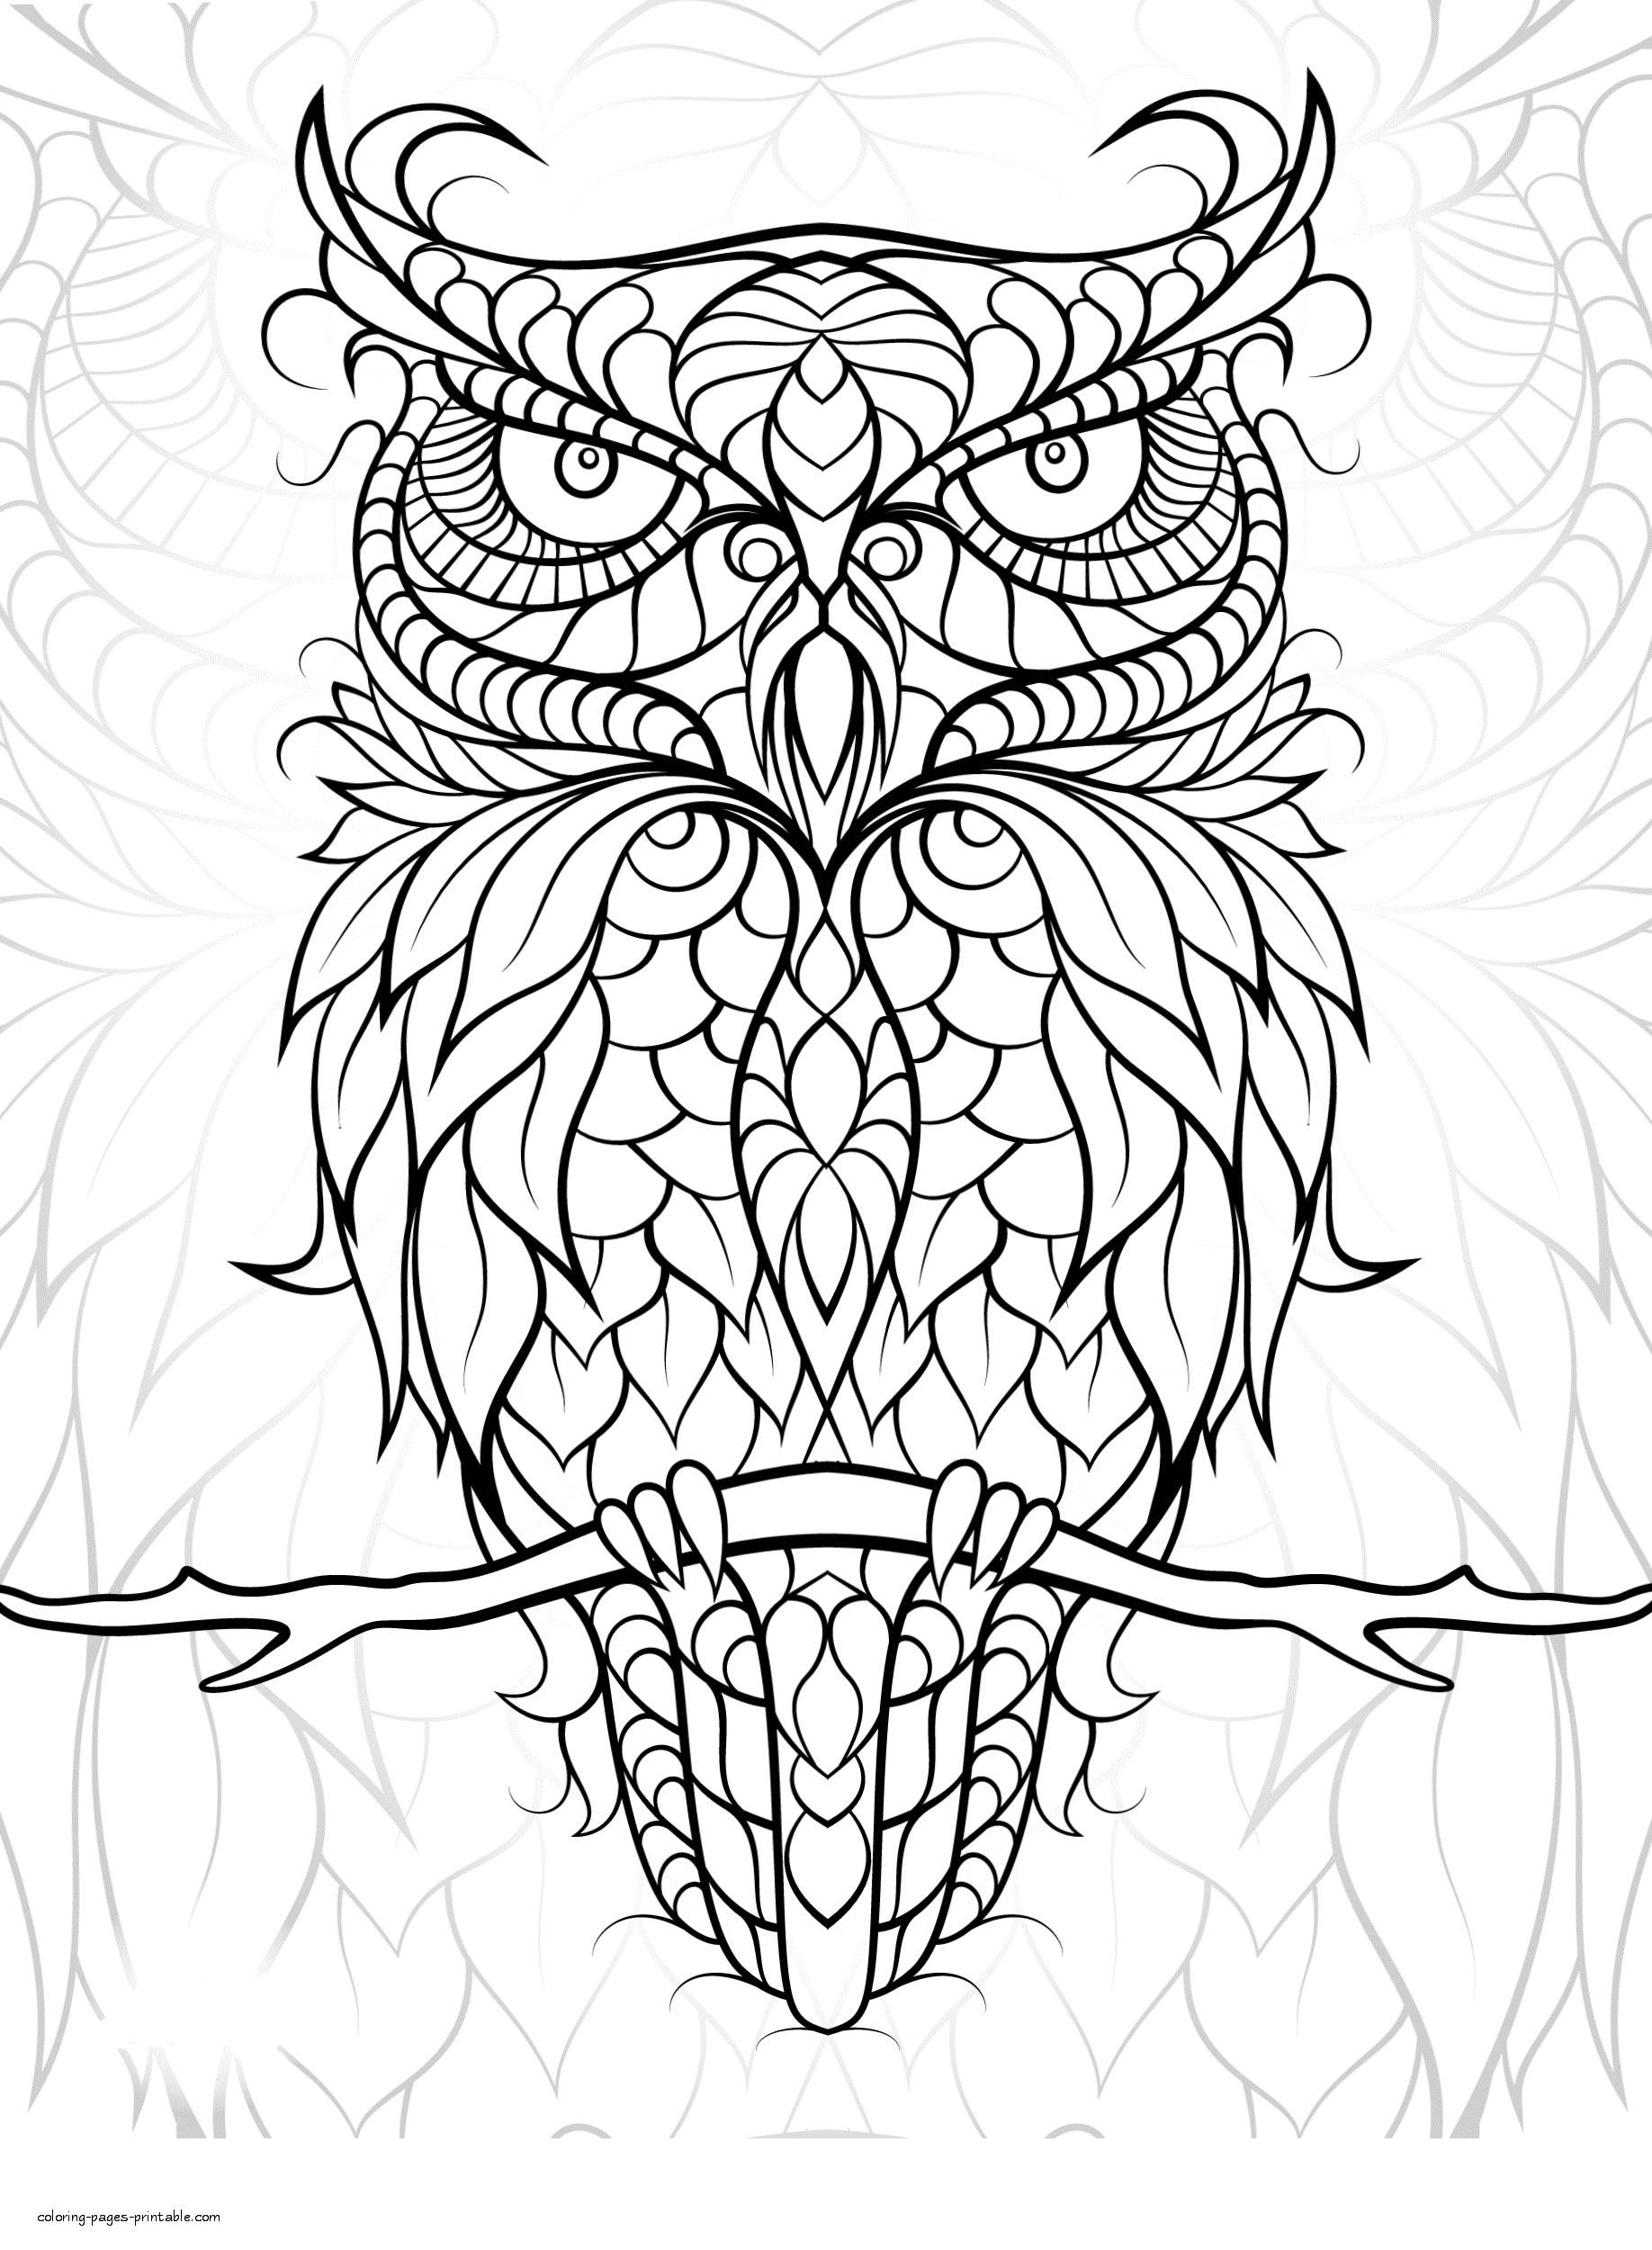 Free Printable Bird Coloring Pages For Adults COLORINGPAGES